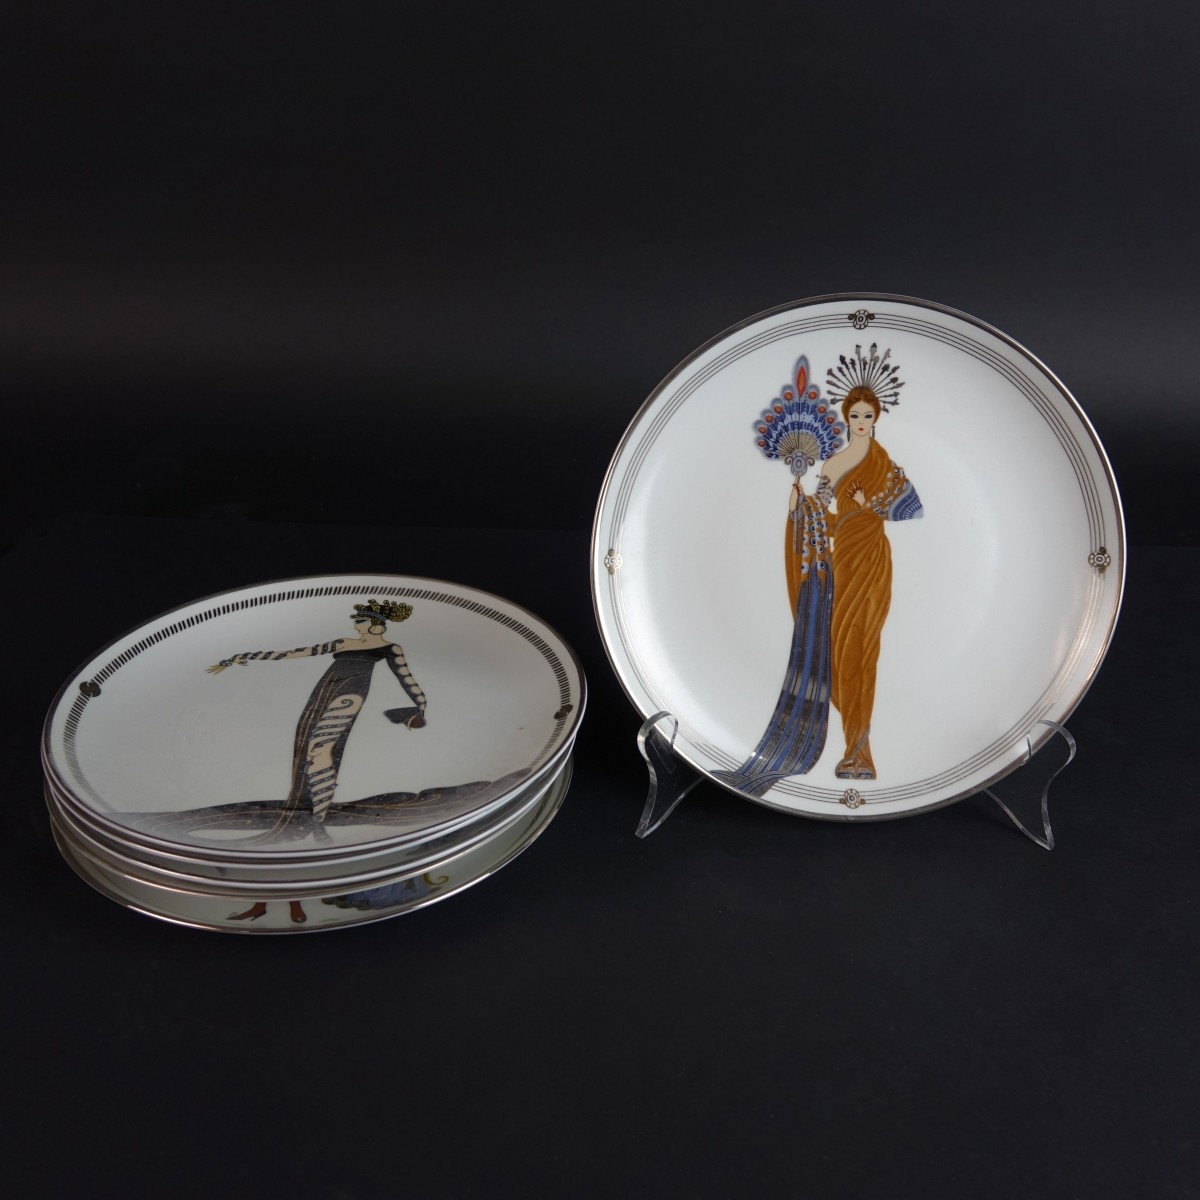 Six (6) Limited Edition House of Erte Plates